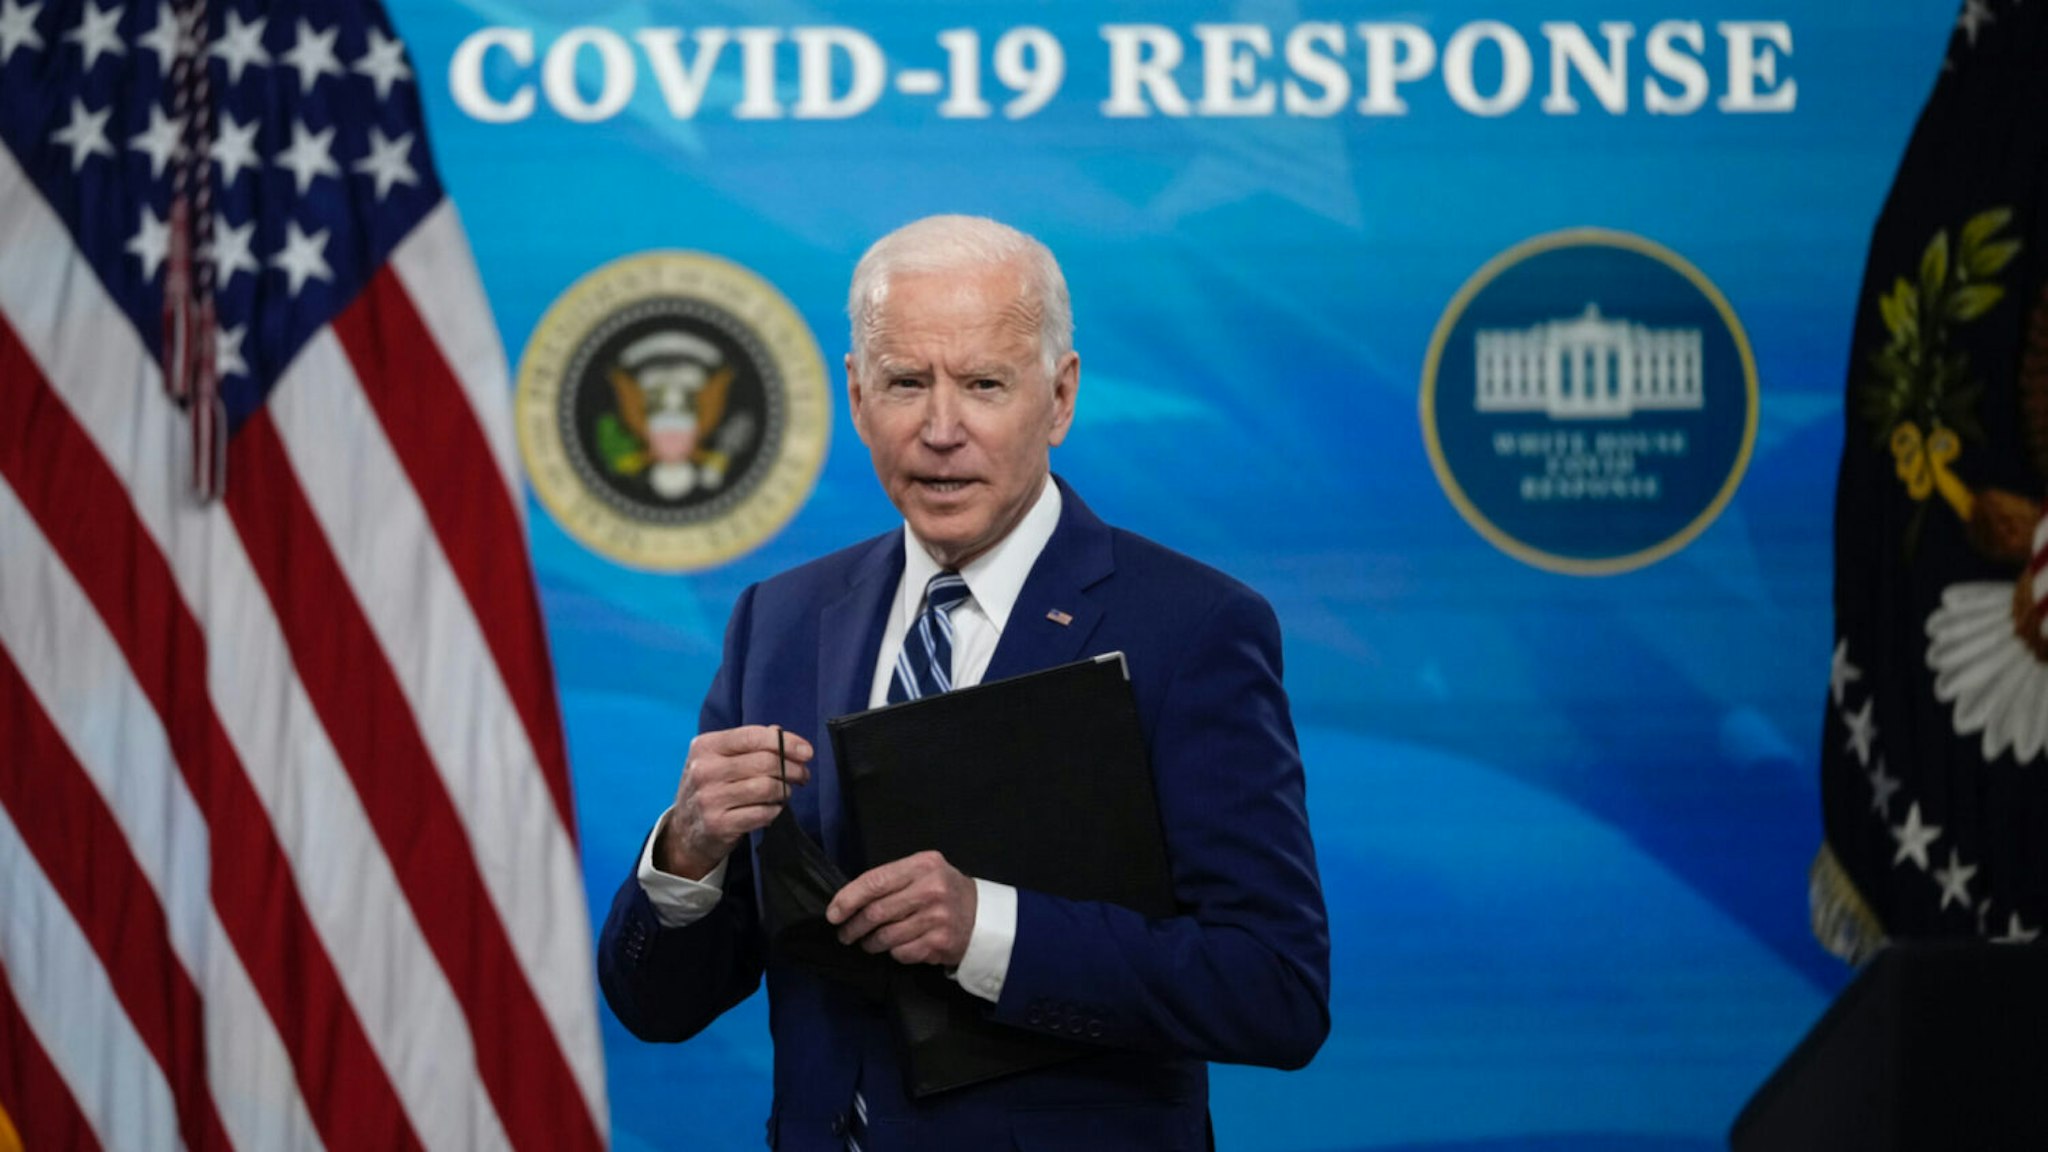 U.S. President Joe Biden responds to a question after delivering remarks on the COVID-19 response and the state of vaccinations in the South Court Auditorium at the White House complex on March 29, 2021 in Washington, DC.